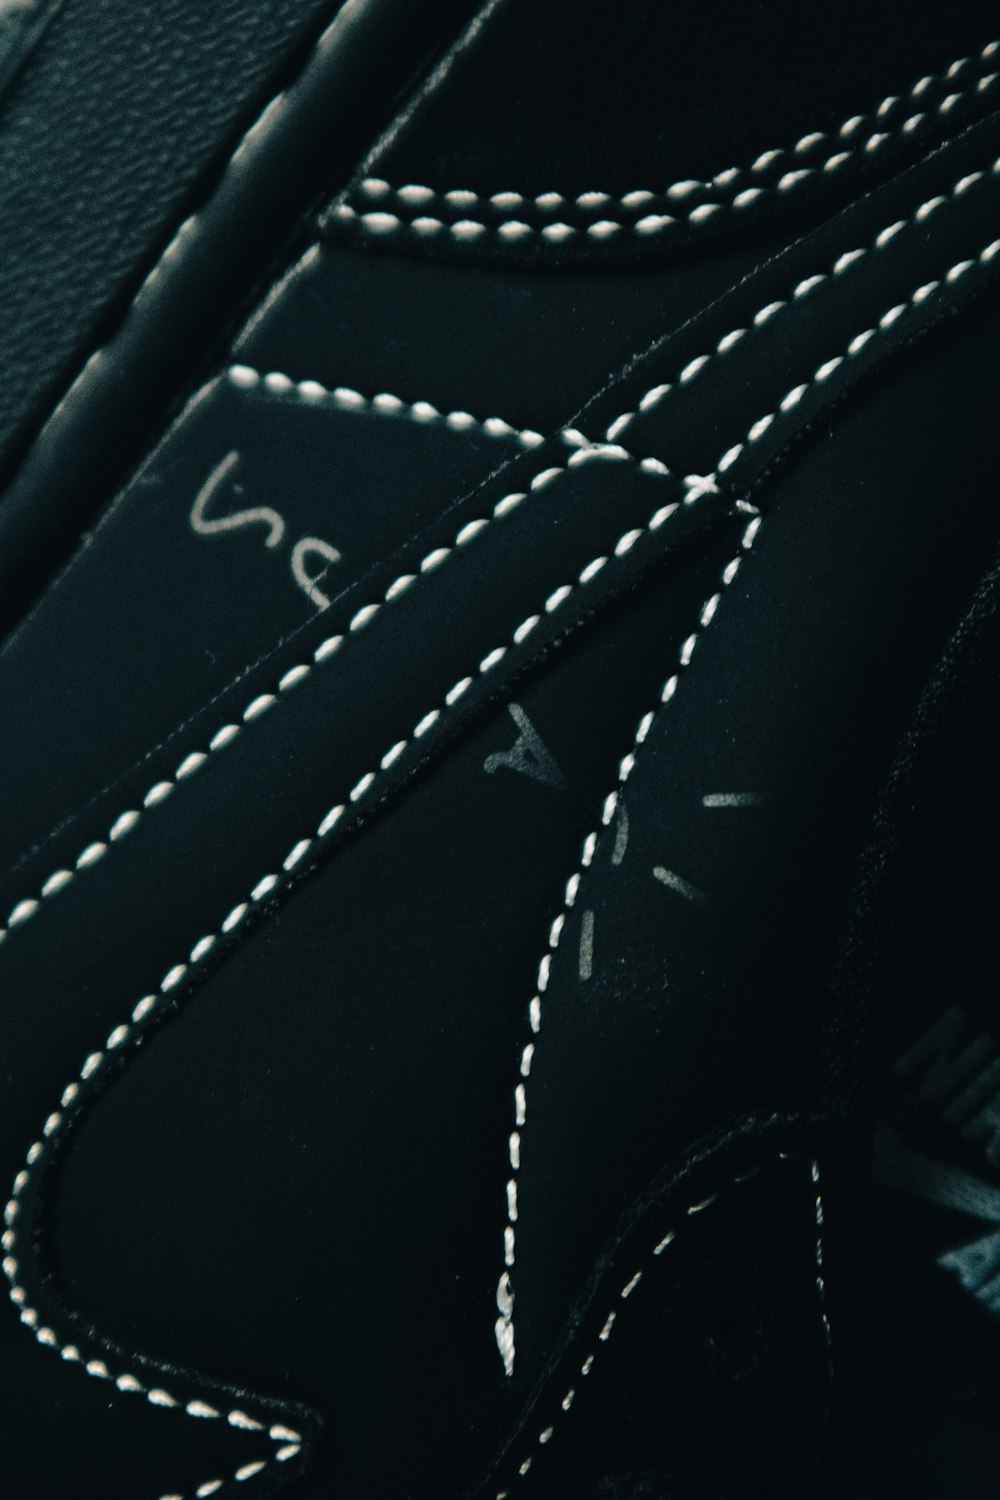 a close up of a black shoe with white stitching